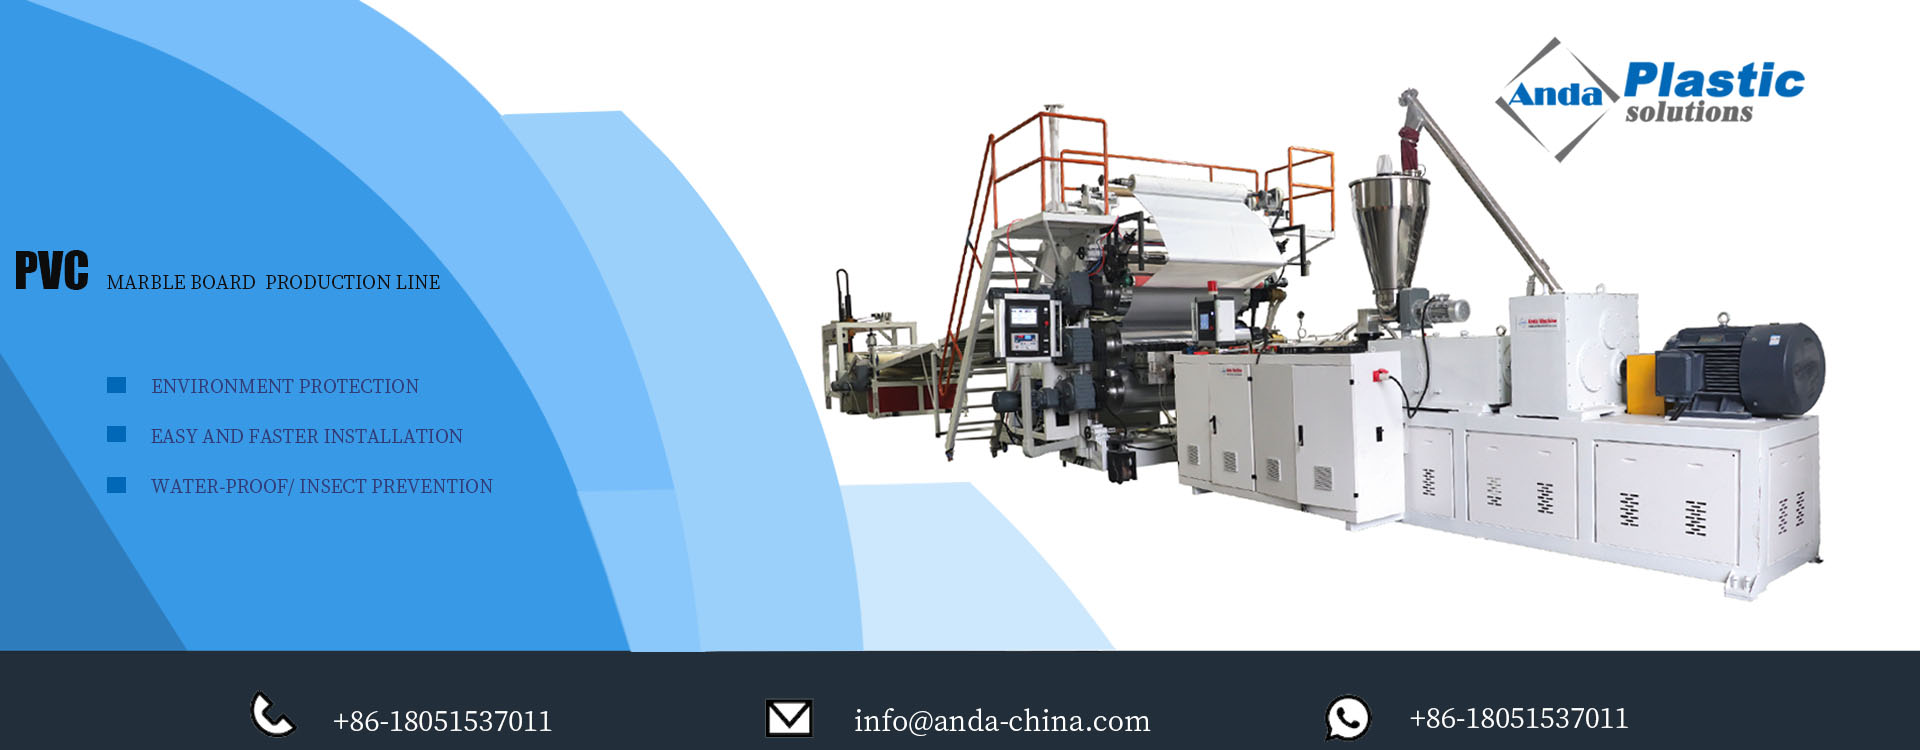 PVC Artificial Marble Polygranite Sheet Production Line Machinery 